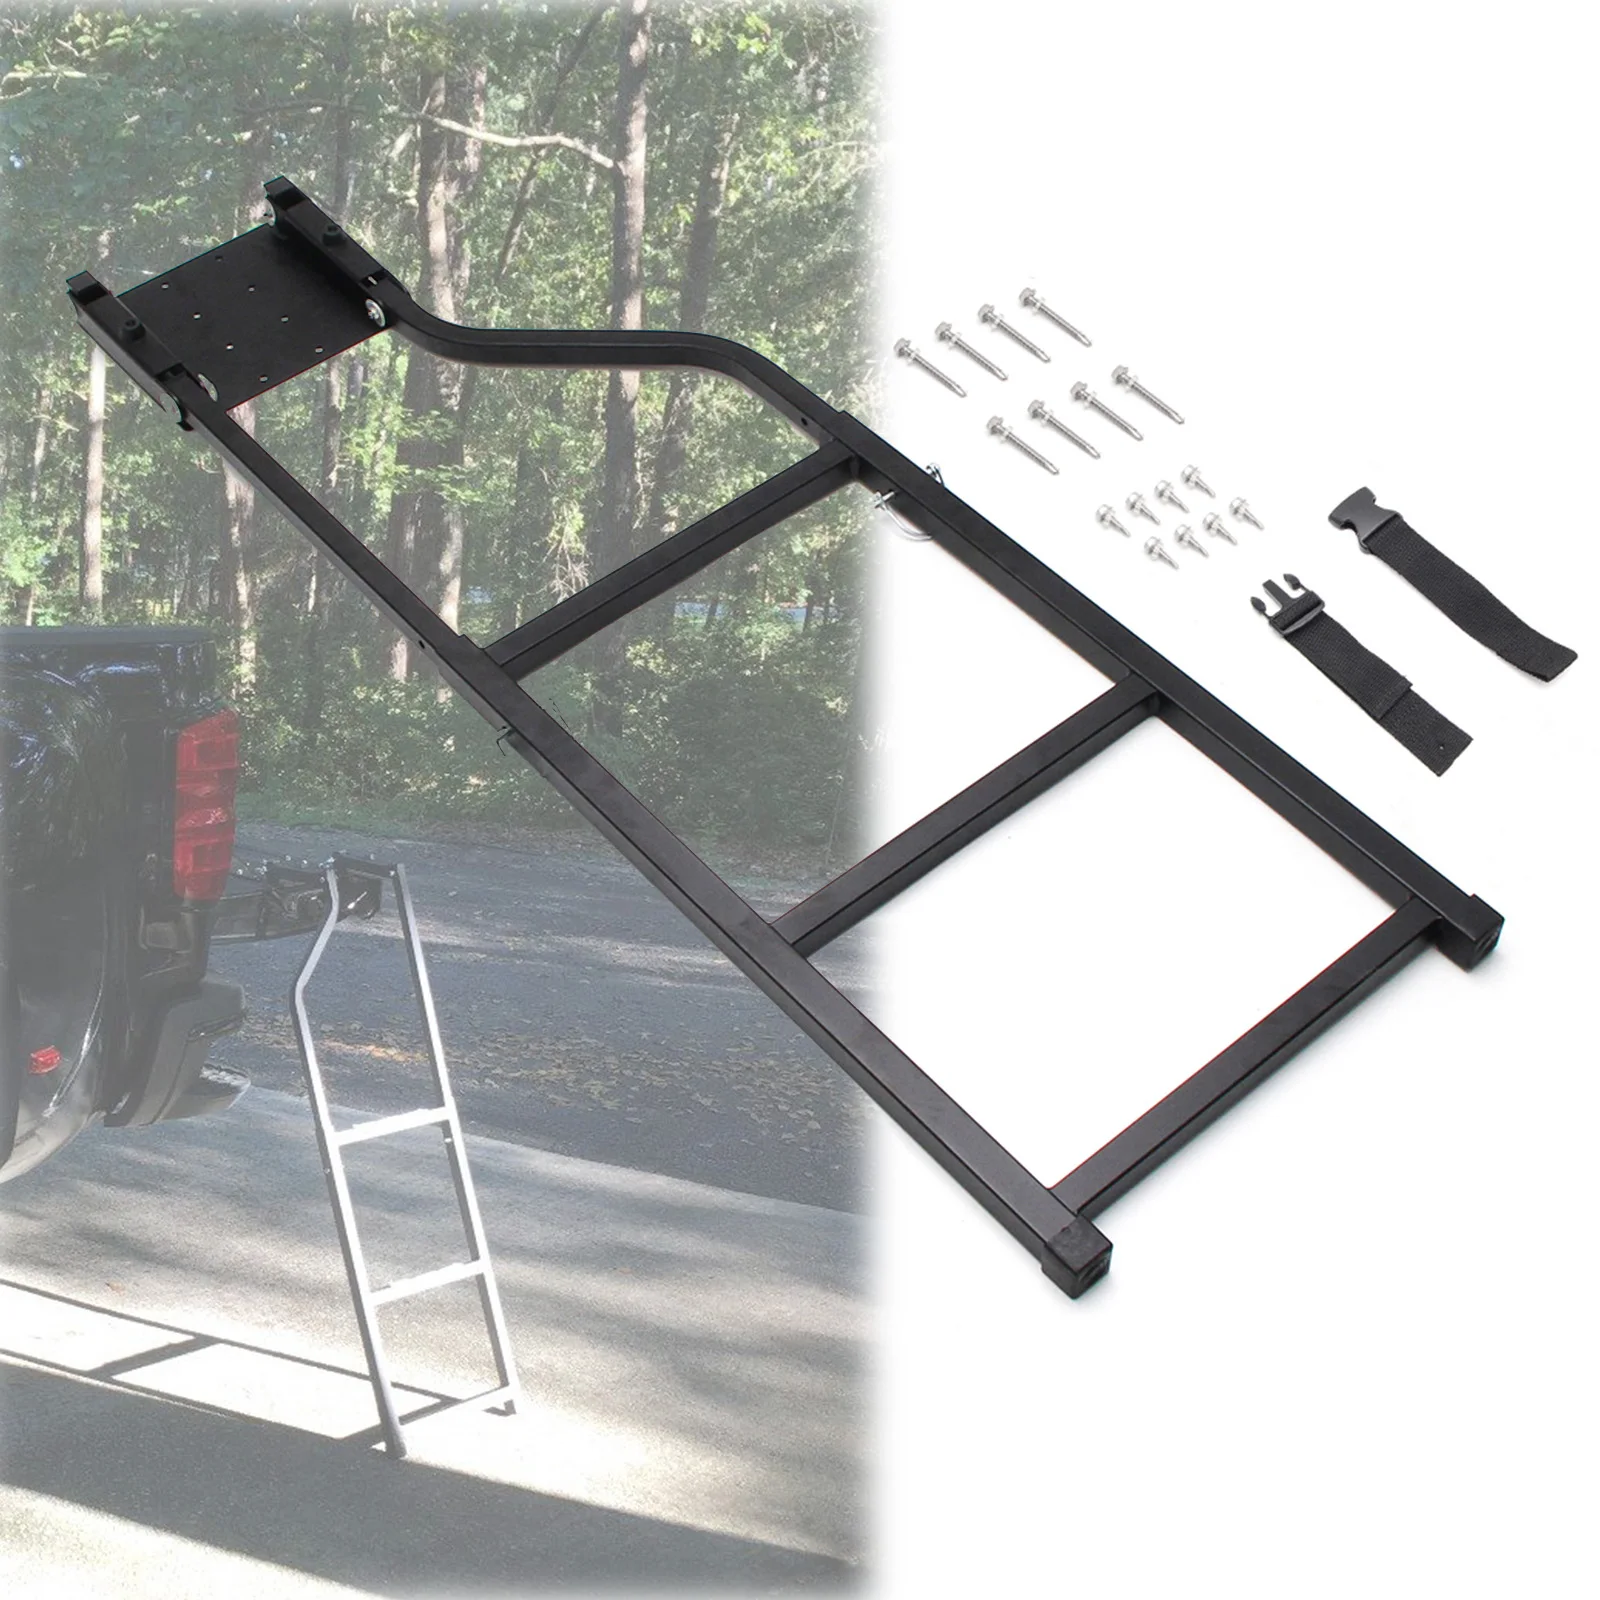 1 pcs Pickup Tailgate Step Cargo Accessories Truck Bed Ladder Universal Extension Step Ladder with Stainless Steel Self Drilling 1set car universal rear door tailgate ladder universal truck tailgate ladder pickup foldable extension step ladder 87 107cm 4x4